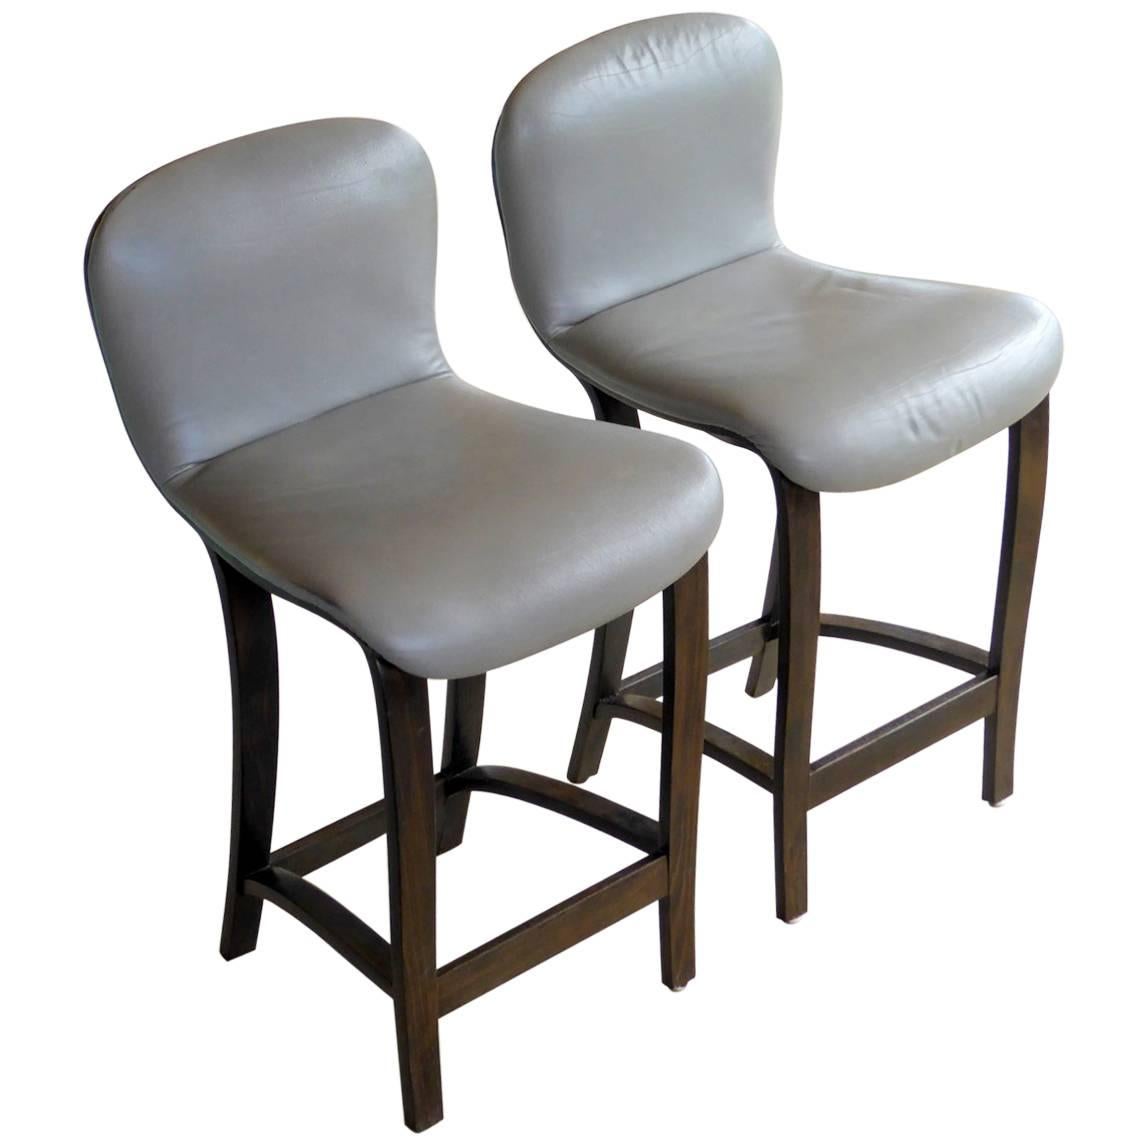 Pair of Rare Barstools by Plycraft For Sale